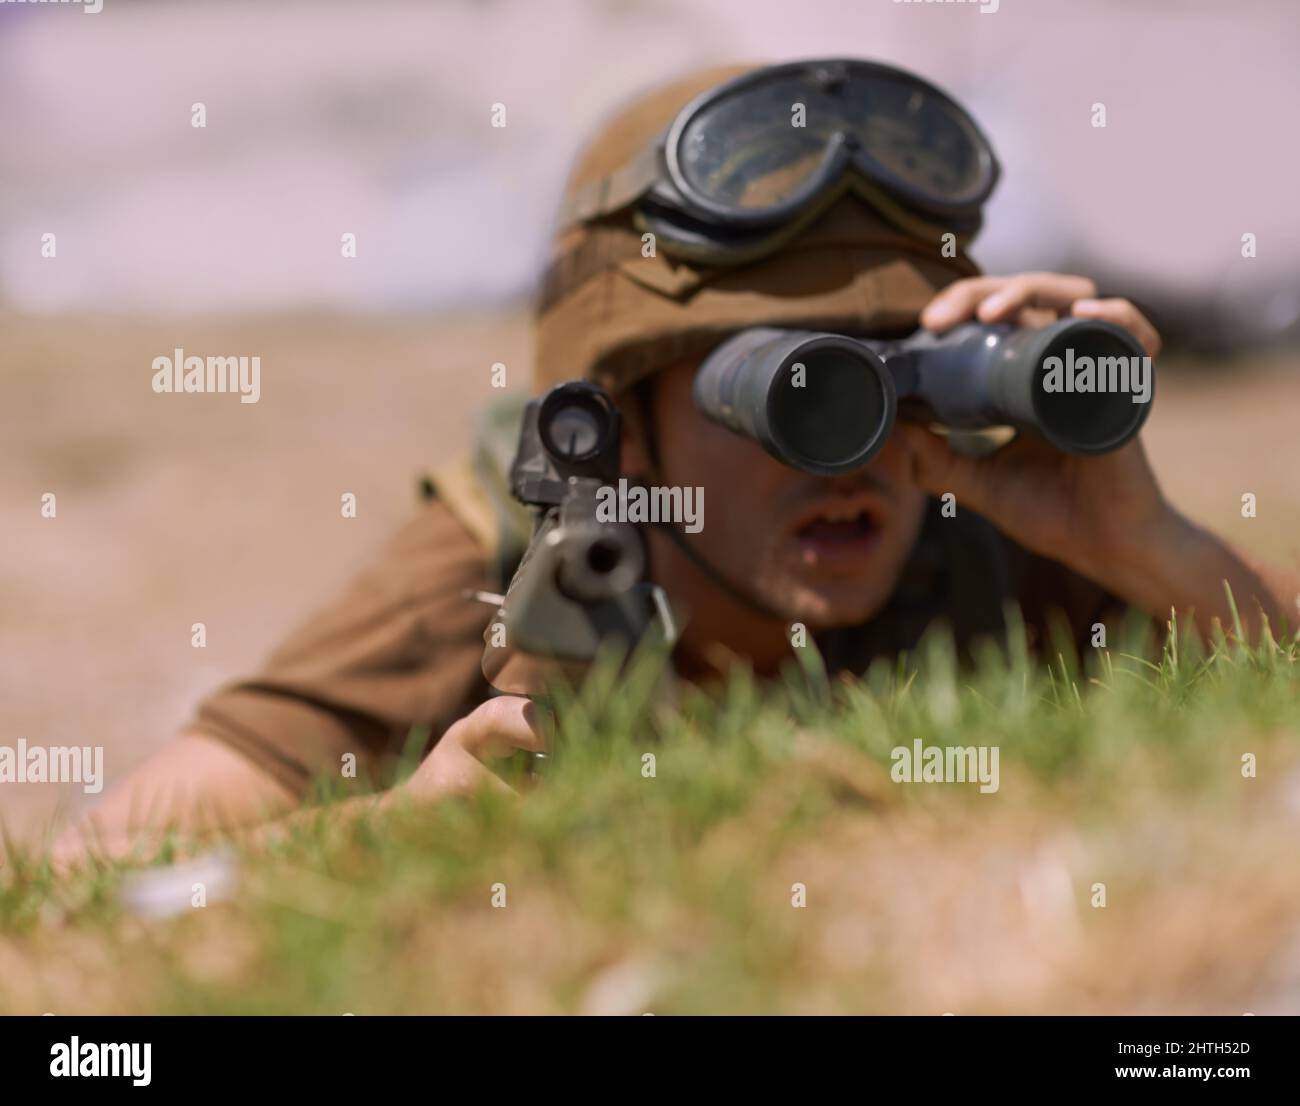 The enemy is in sight. A young soldier looking through his binoculars. Stock Photo